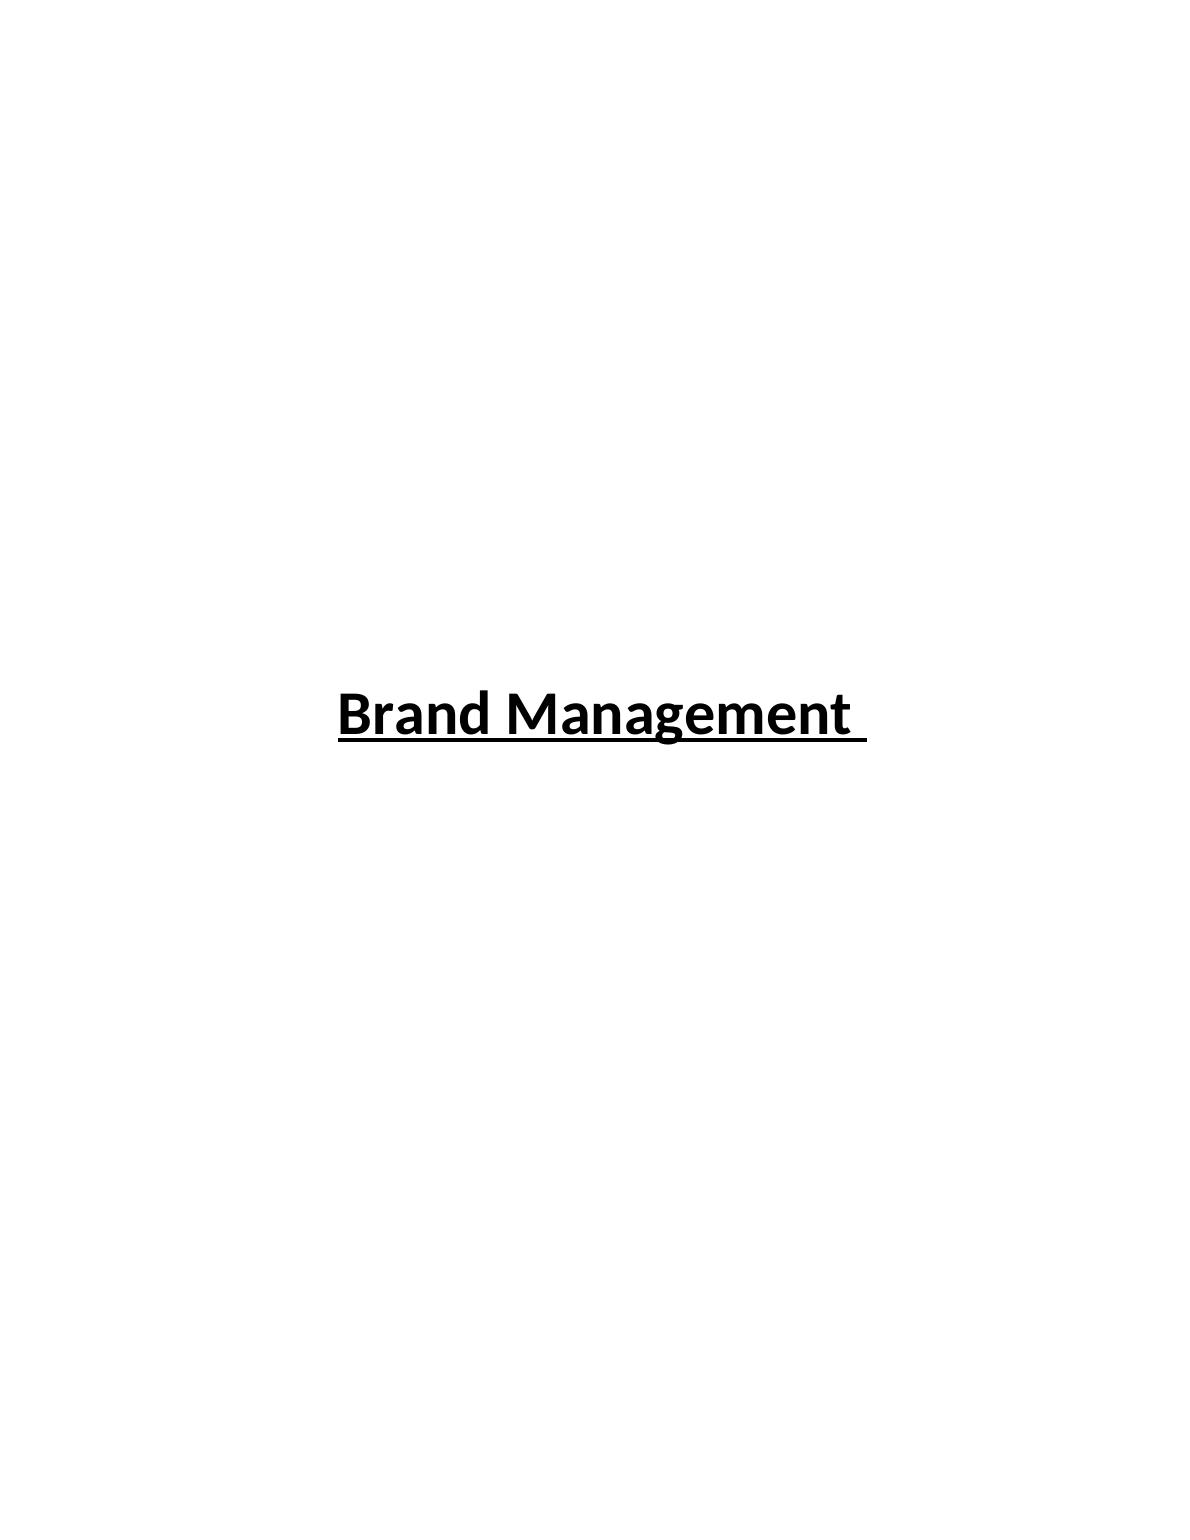 Report on Aspects of Brand Management_1